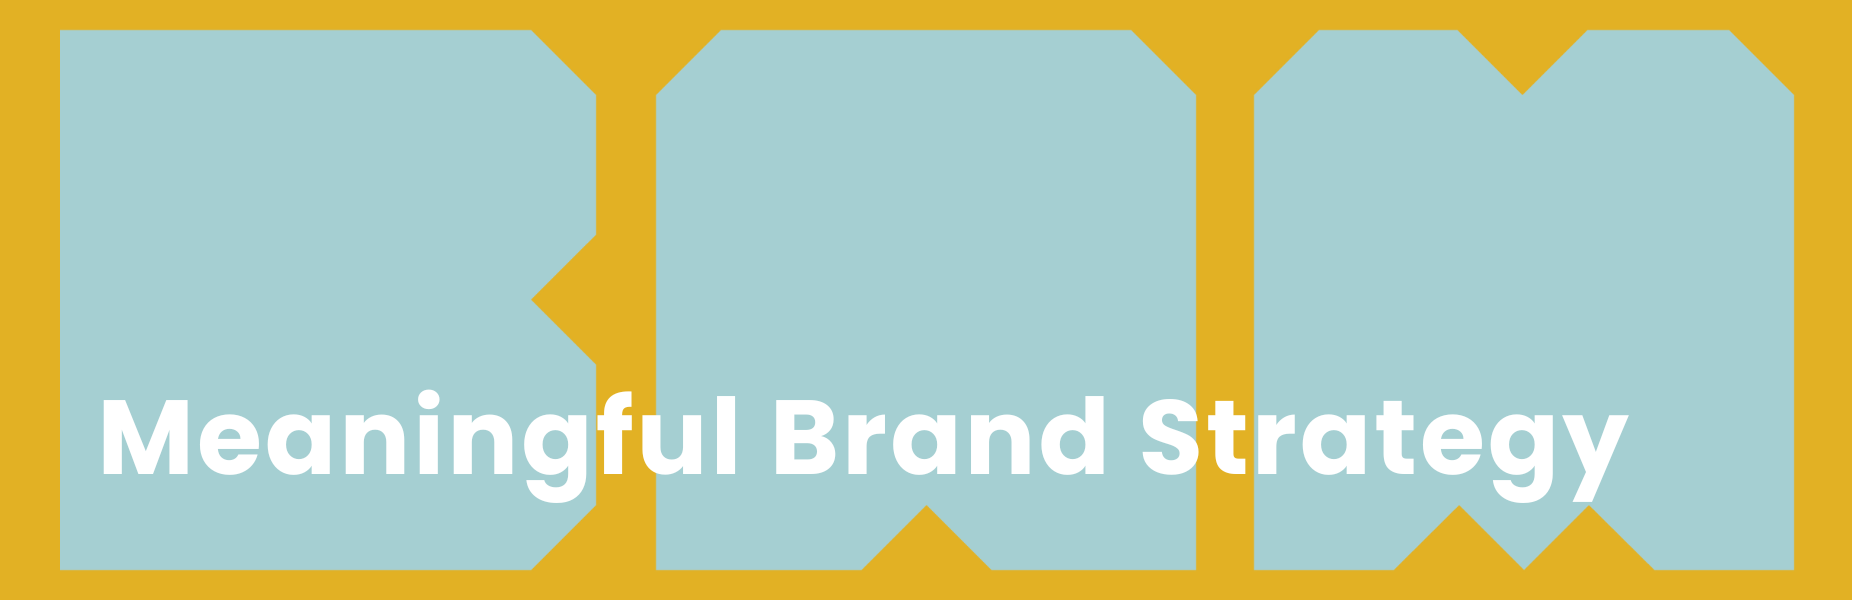 Education - Meaningful Brand Strategy  (1)